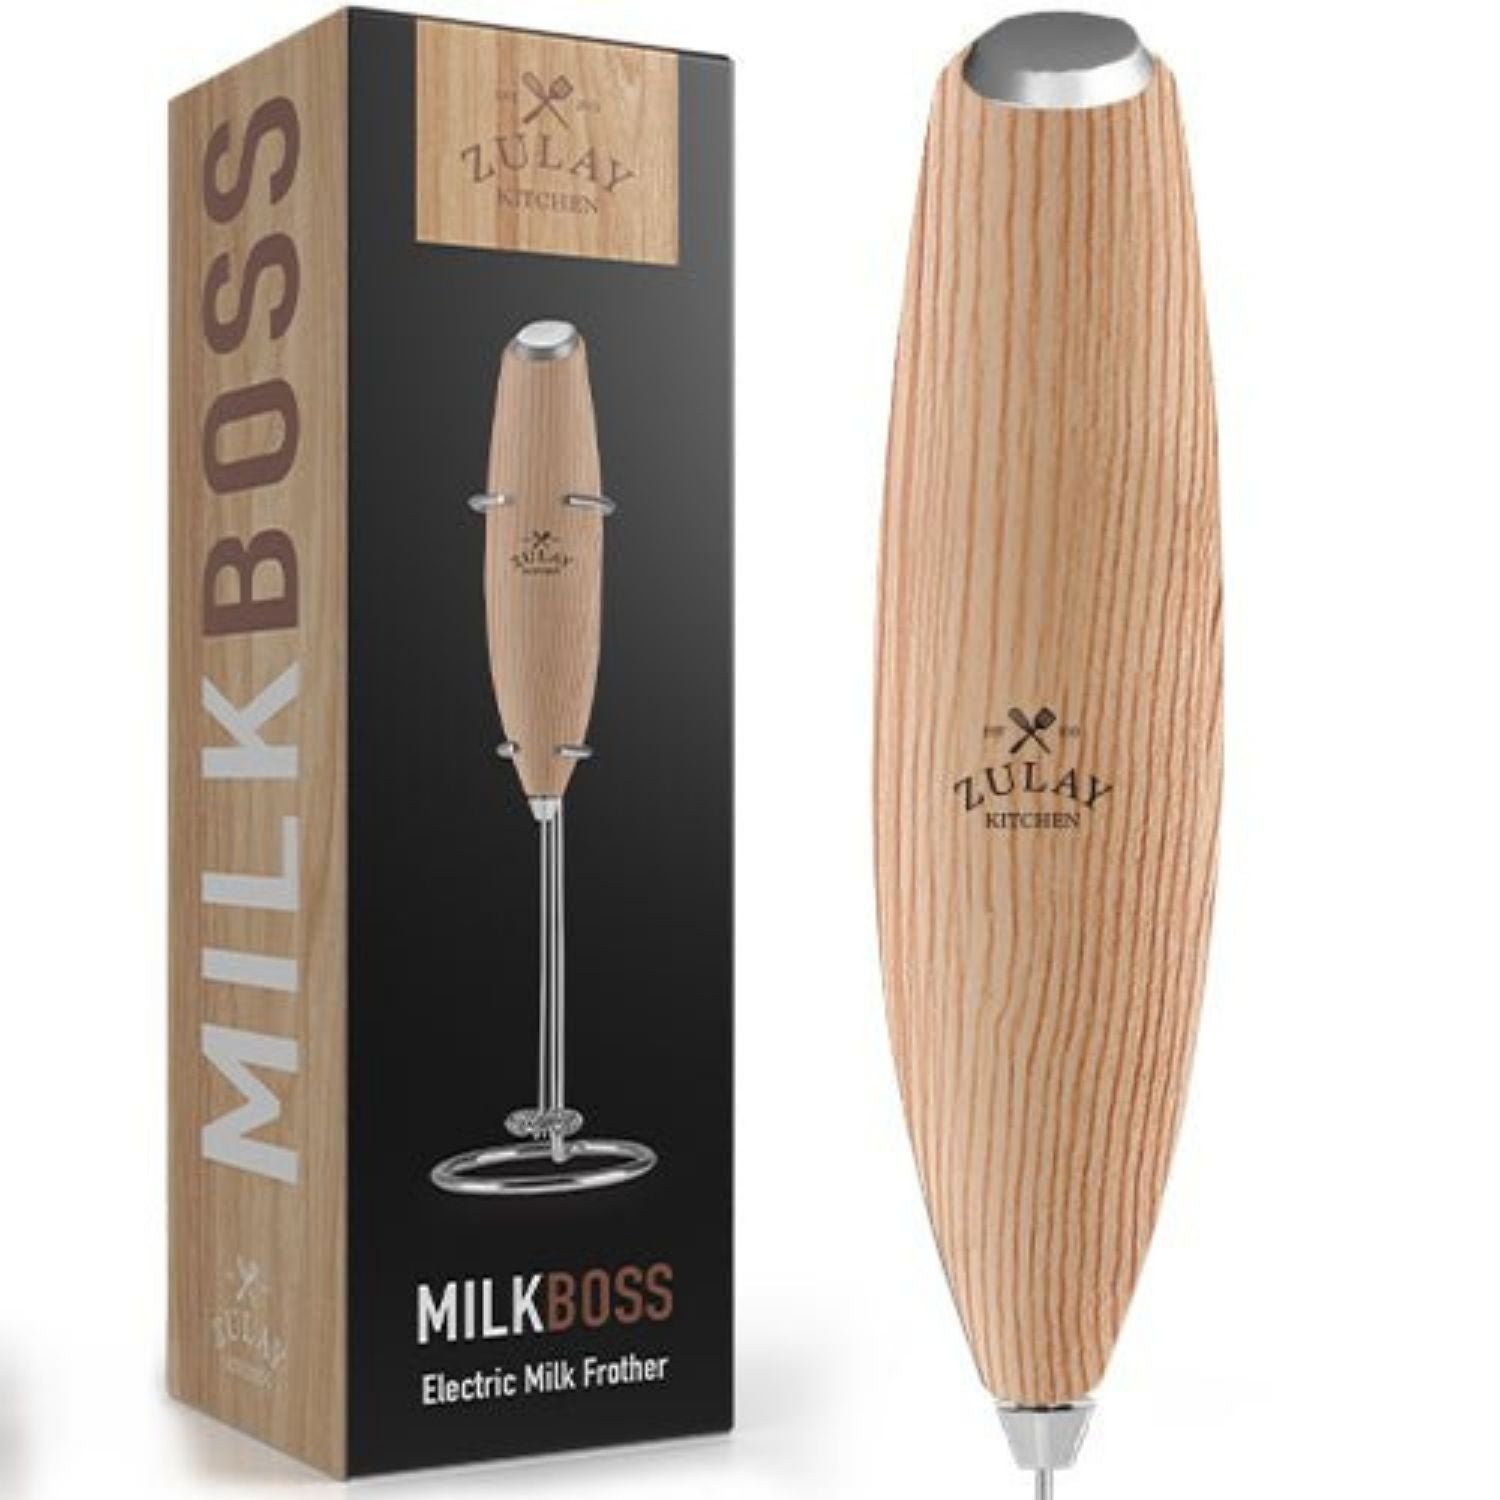 Zulay Kitchen Milk Boss Milk Frother With Stand - White and Black